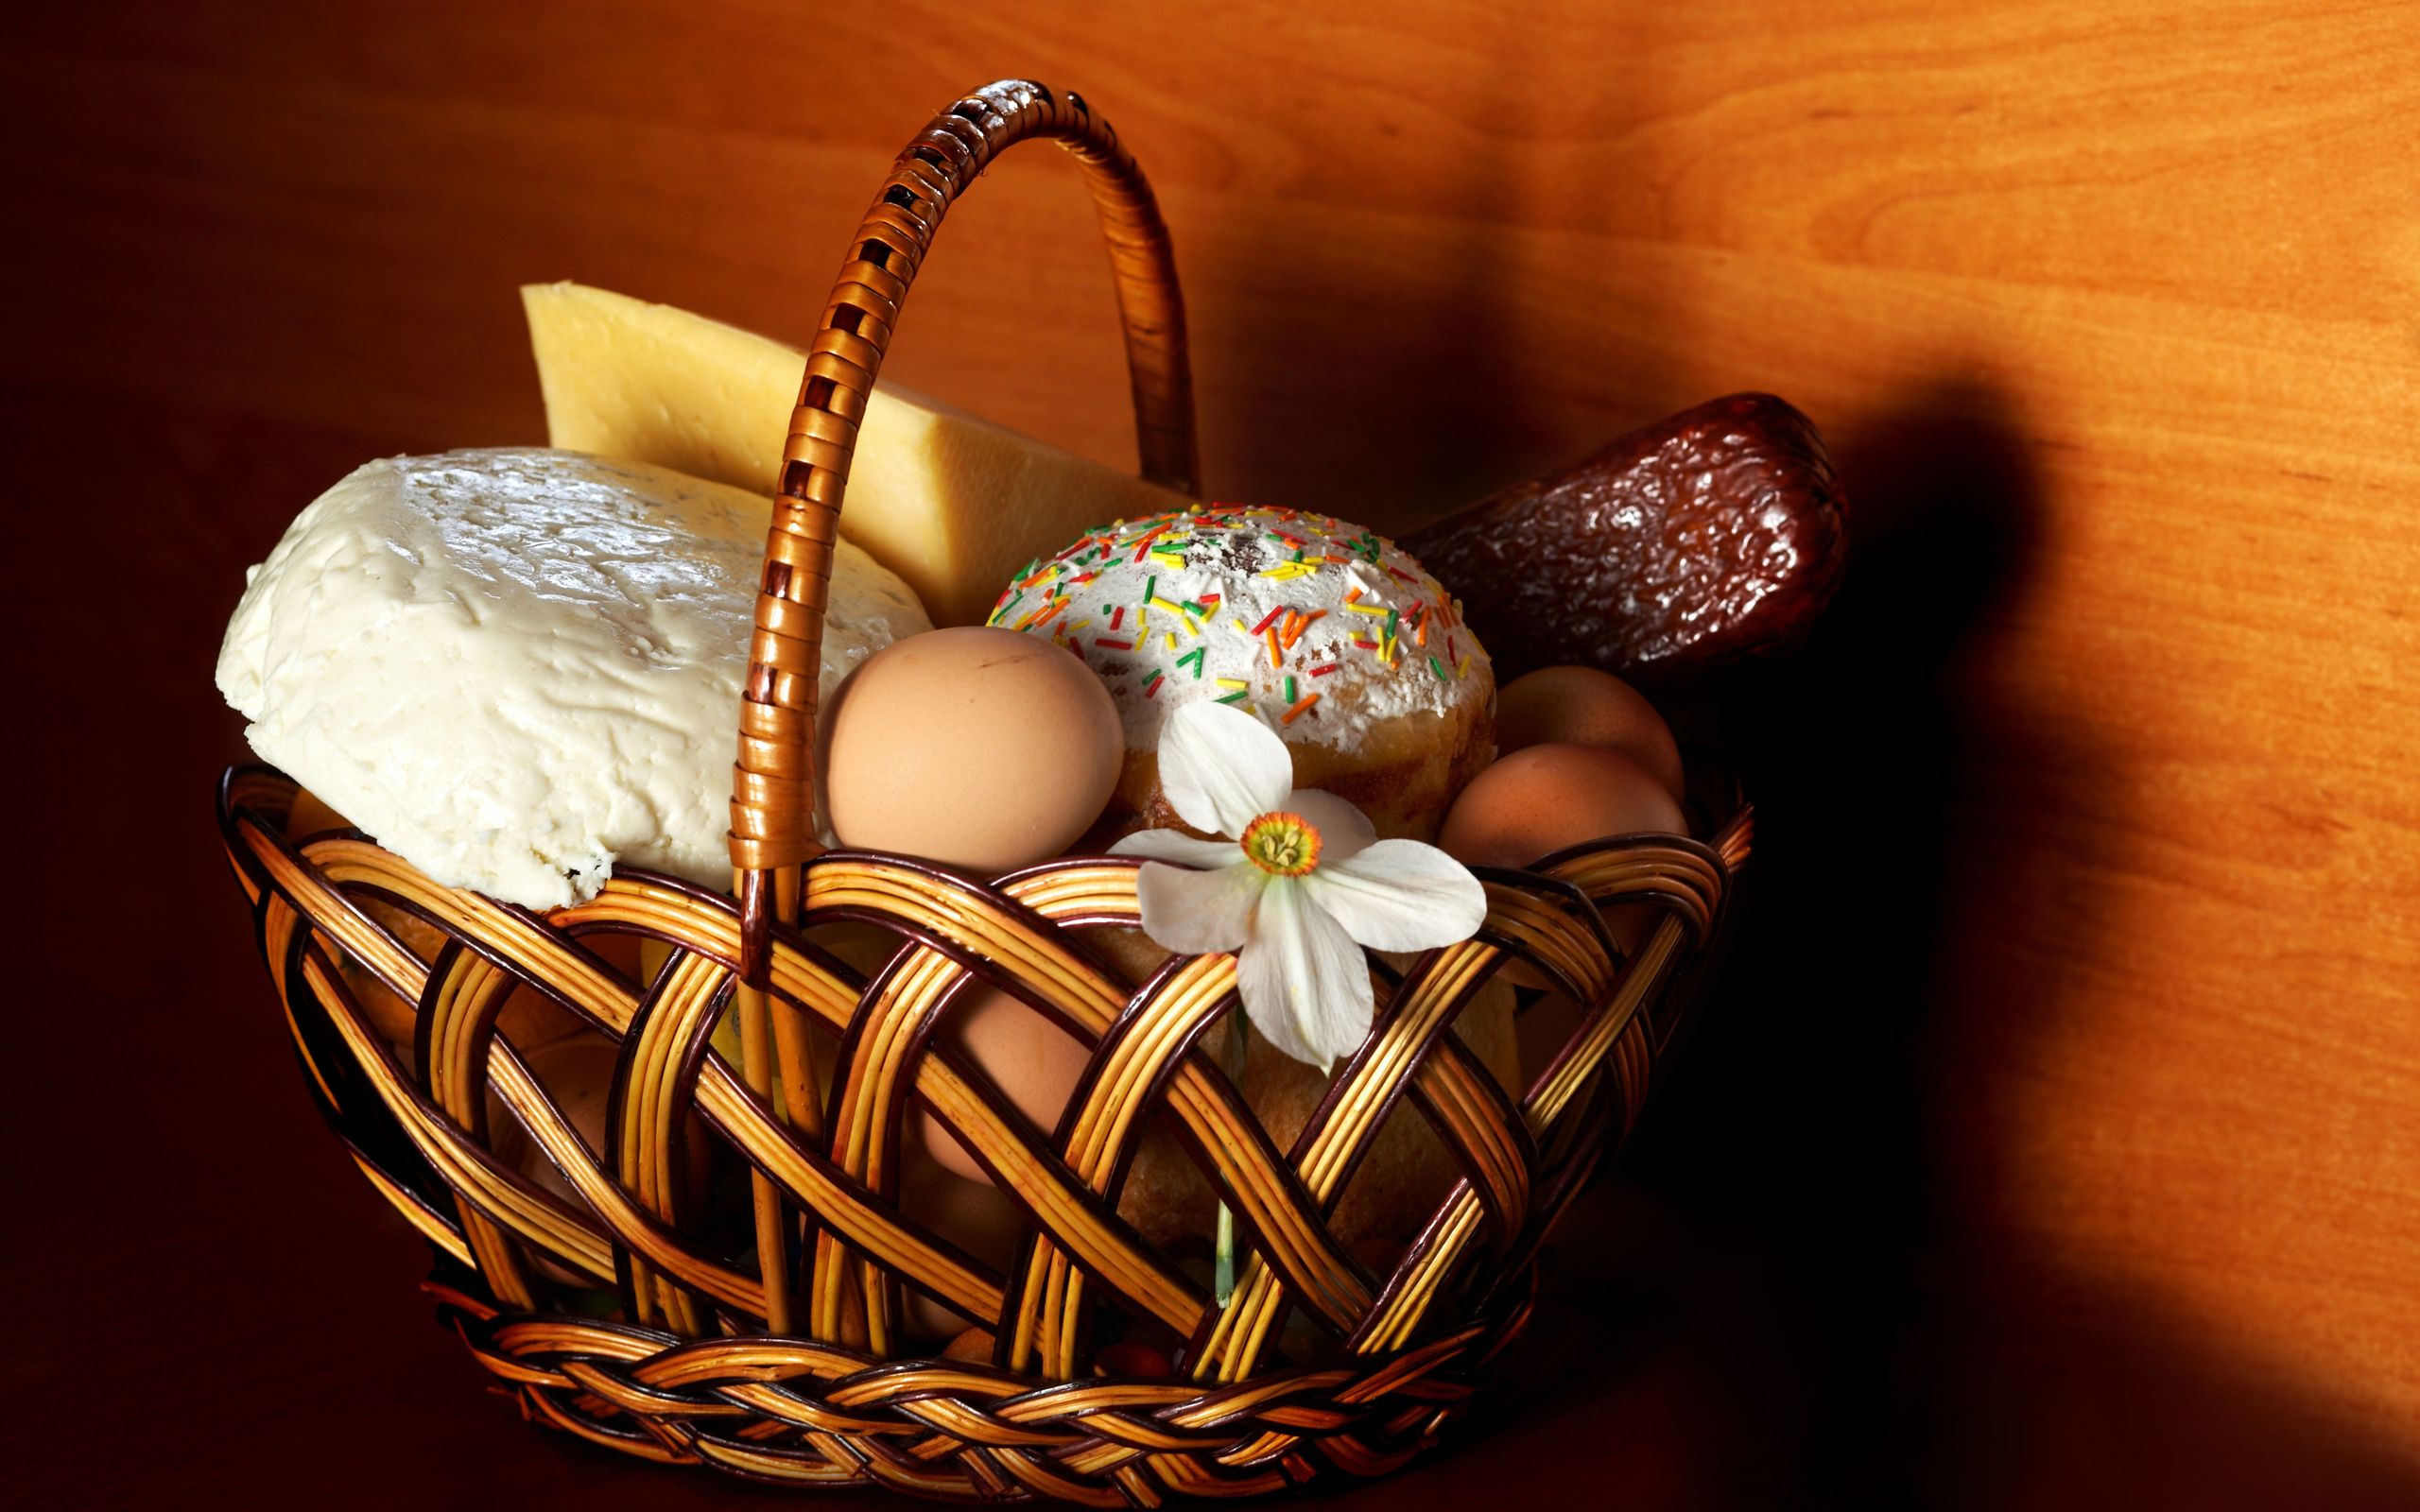 Easter basket with goodies wallpaper. Easter basket with goodies